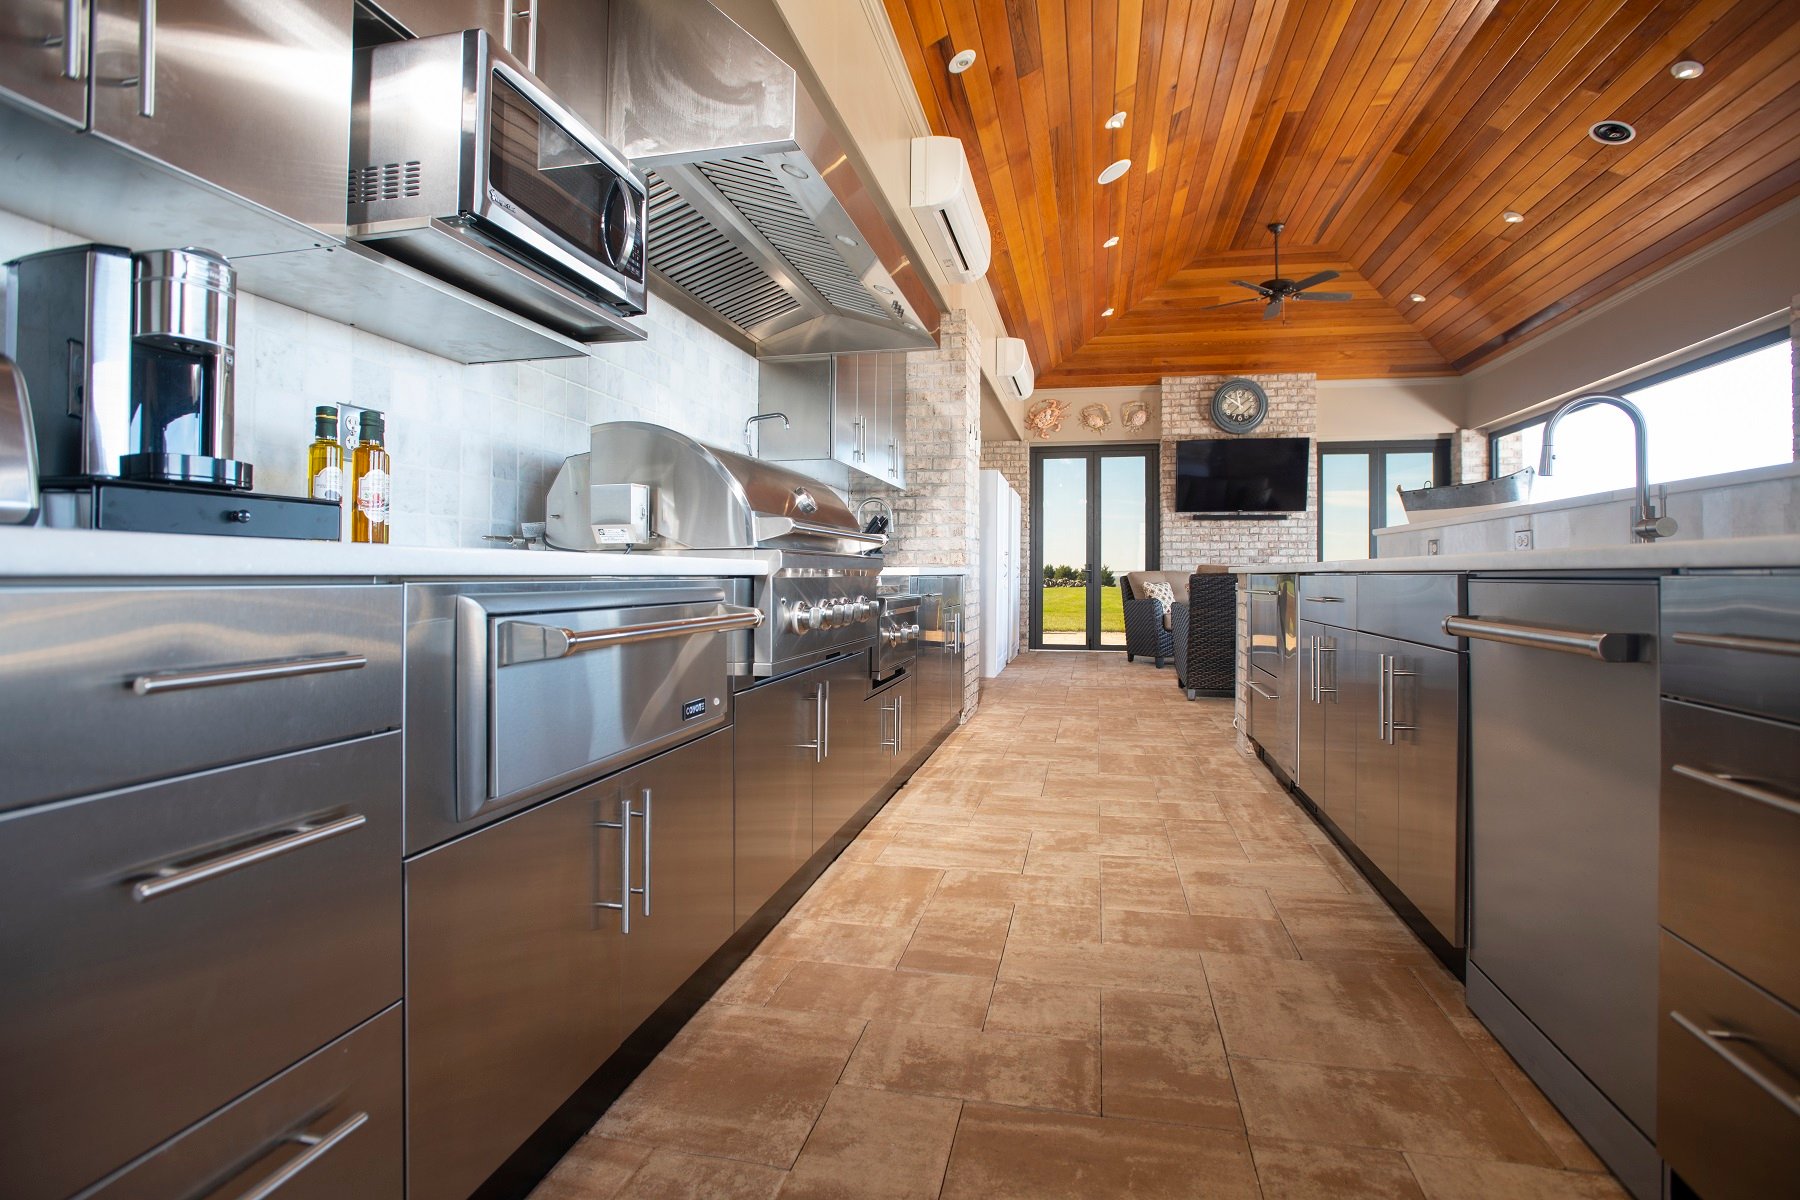 danver_cabinets_stainless_steel_poolhouse_kitchen (4)